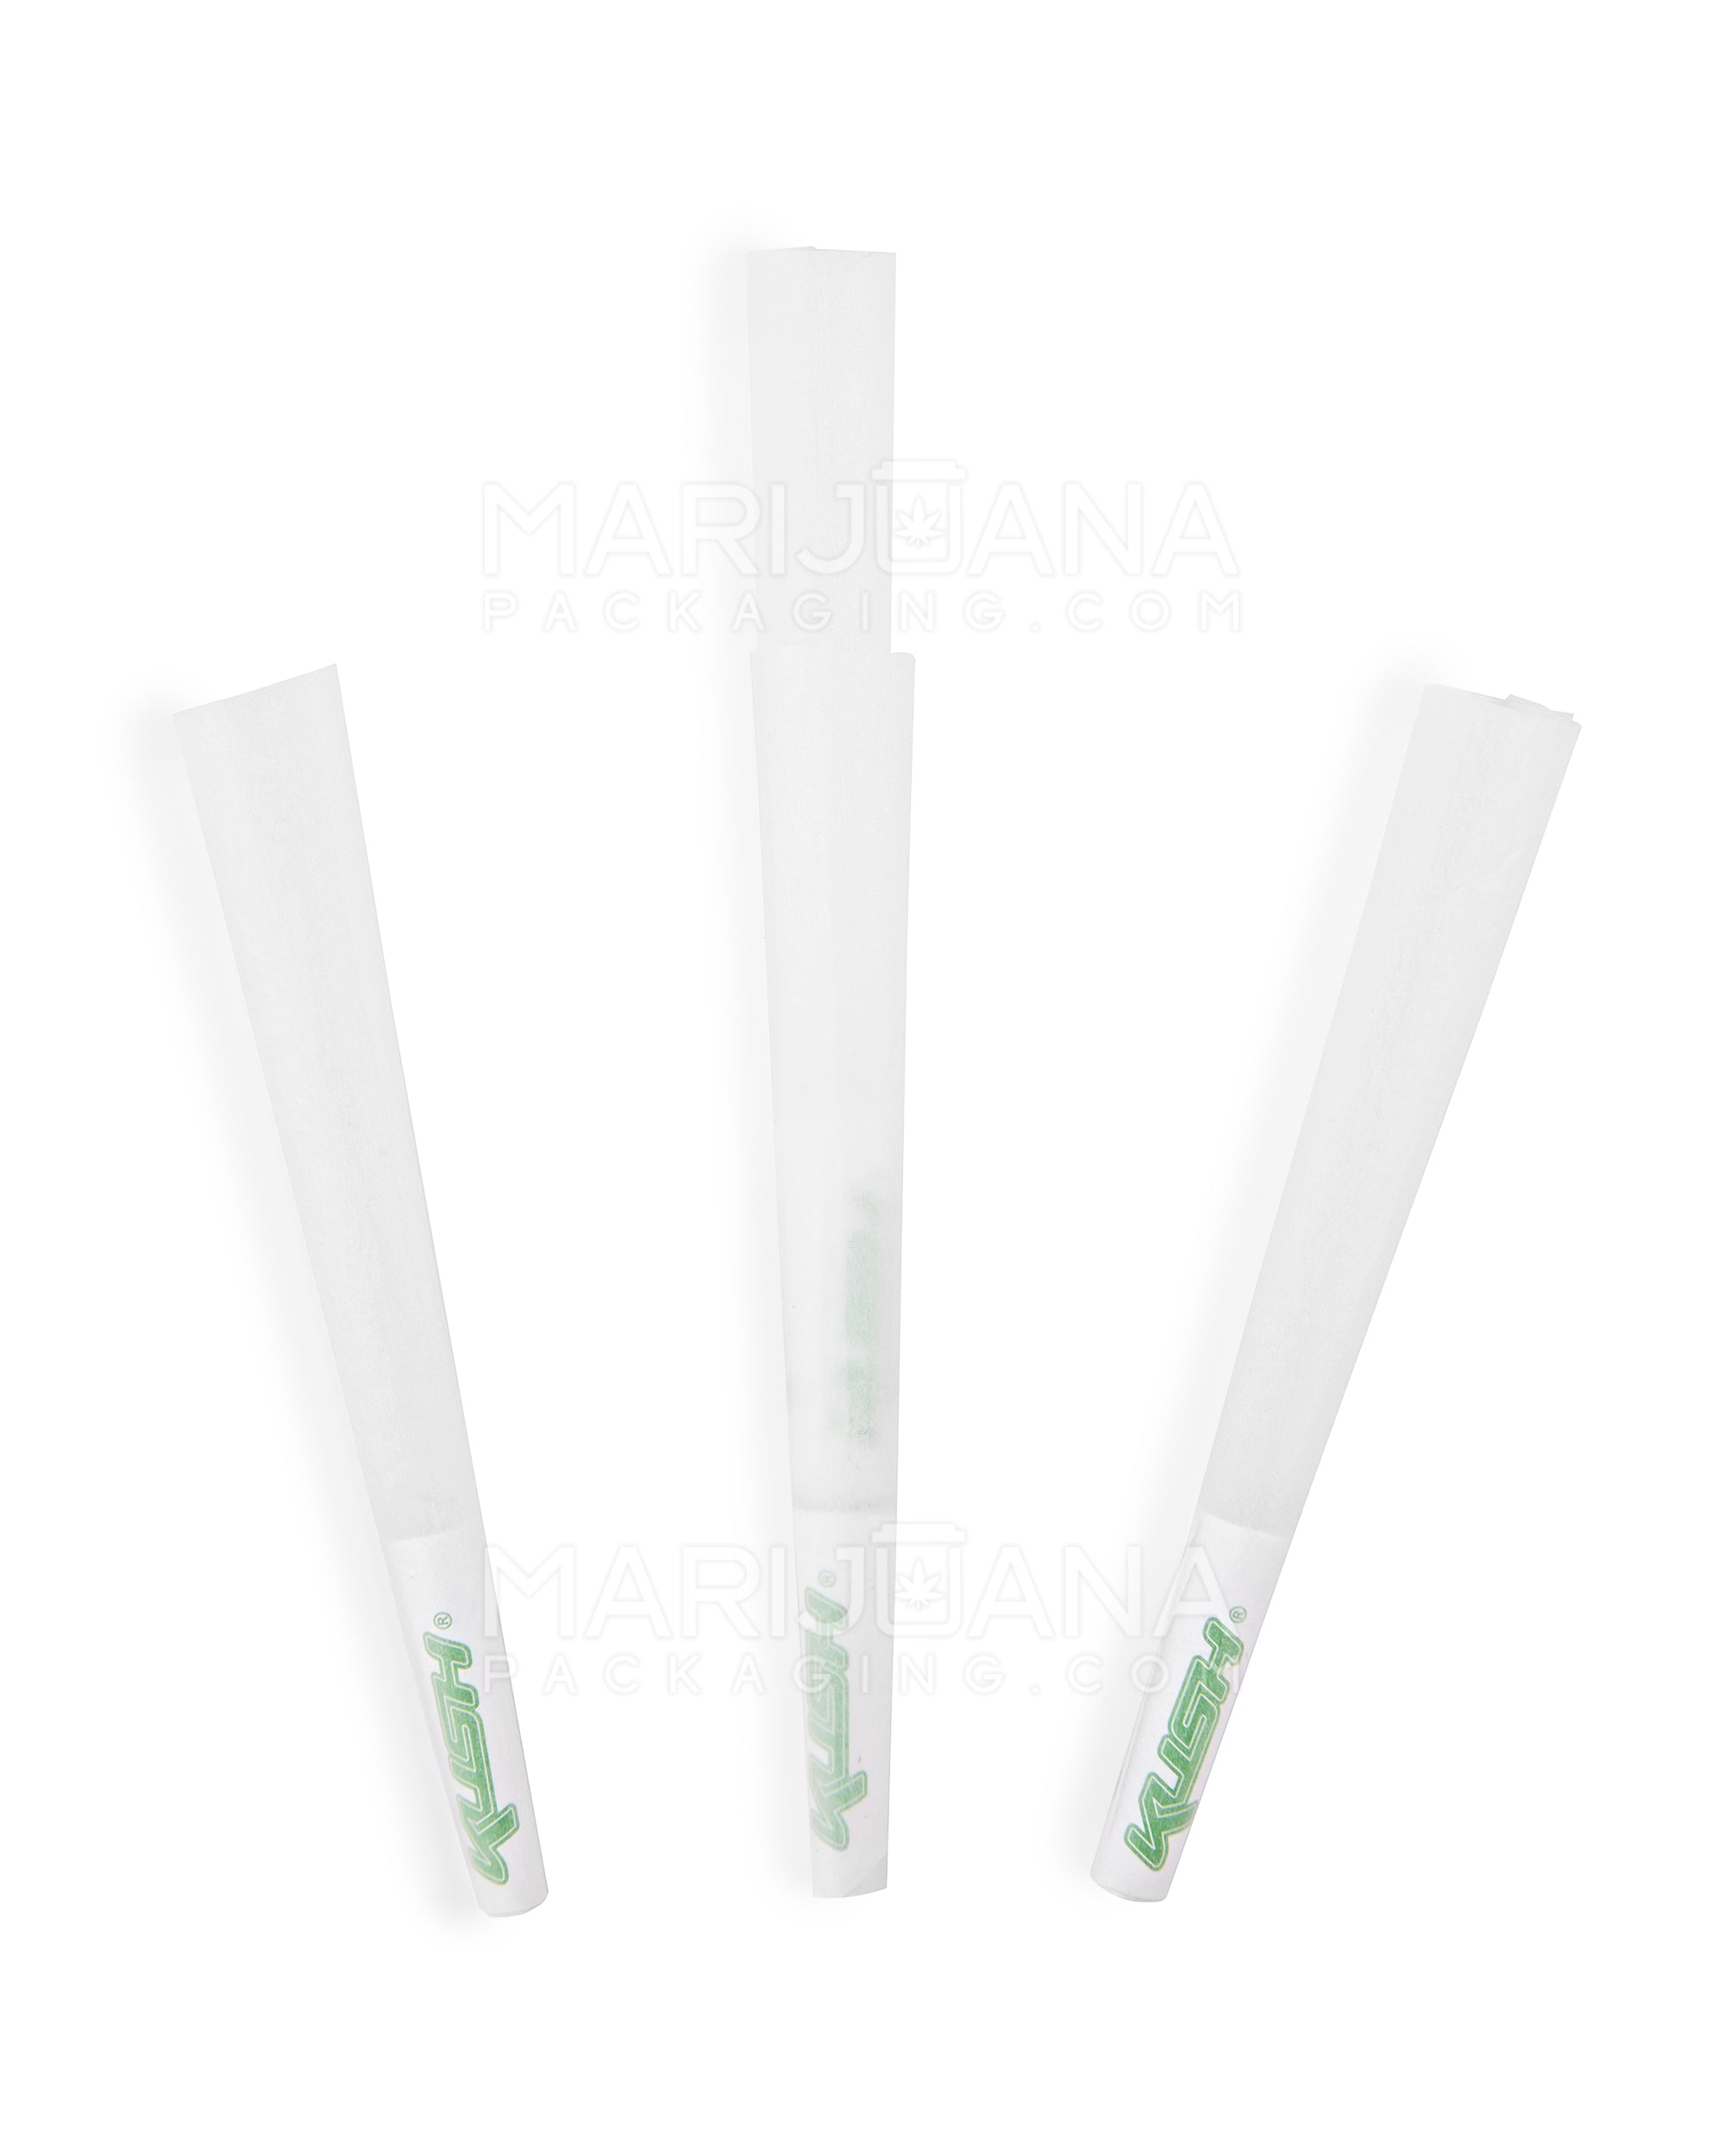 KUSH | Bleached 1 1/4 Size Pre-Rolled Cones w/ Filter Tip | 84mm - Hemp Paper - 900 Count - 4